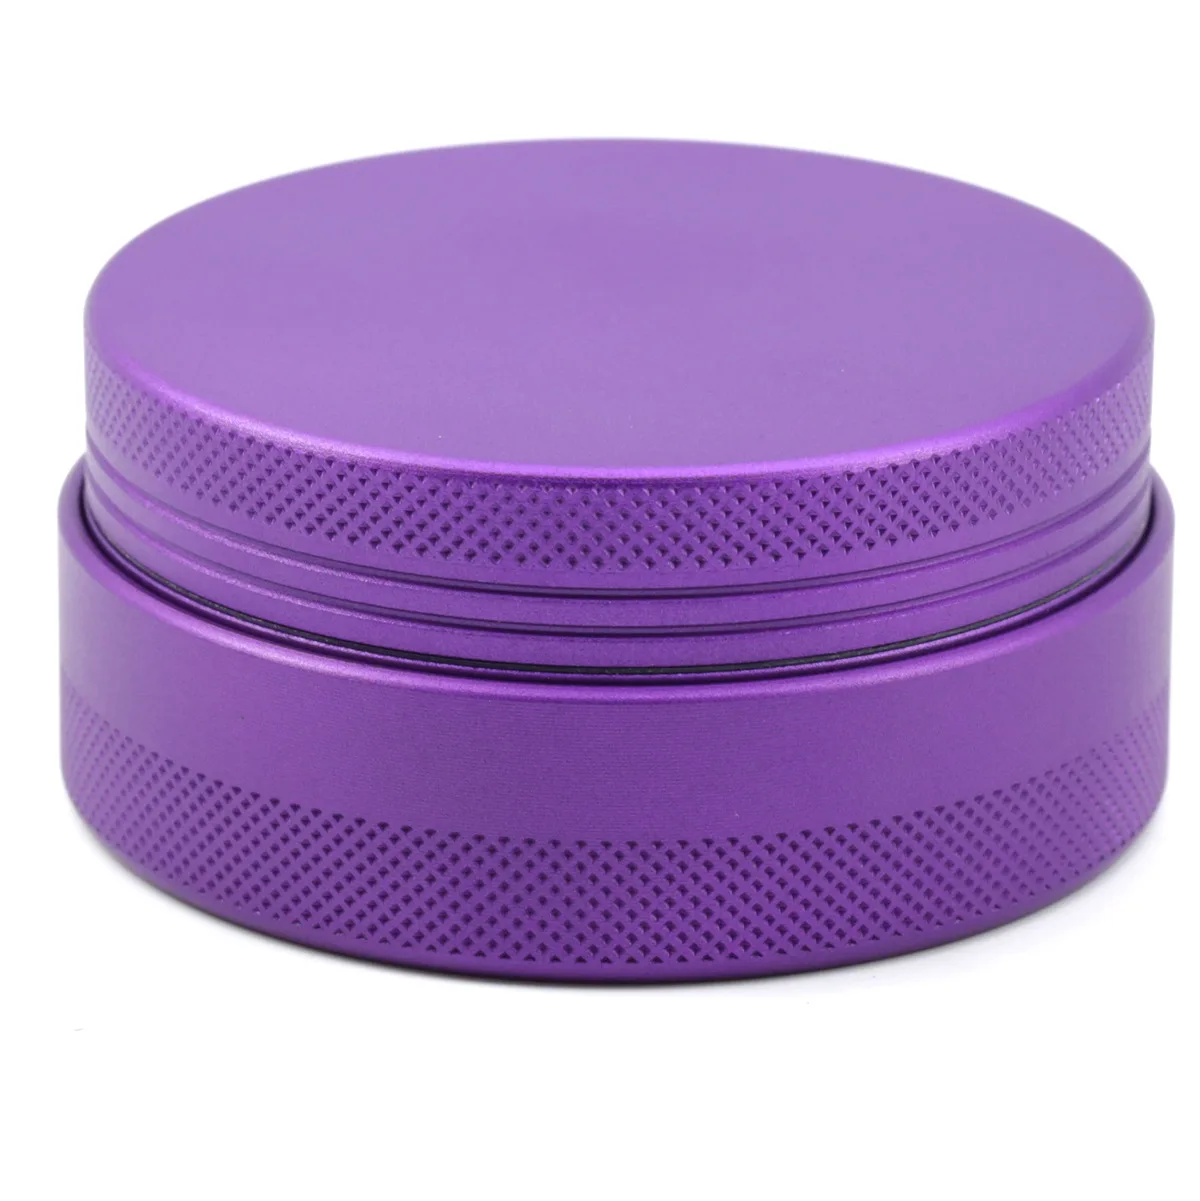 New style compressed version 2 layers visible 4 parts Aluminum alloy 65mm inner rotatable screen herb tobacco grinder